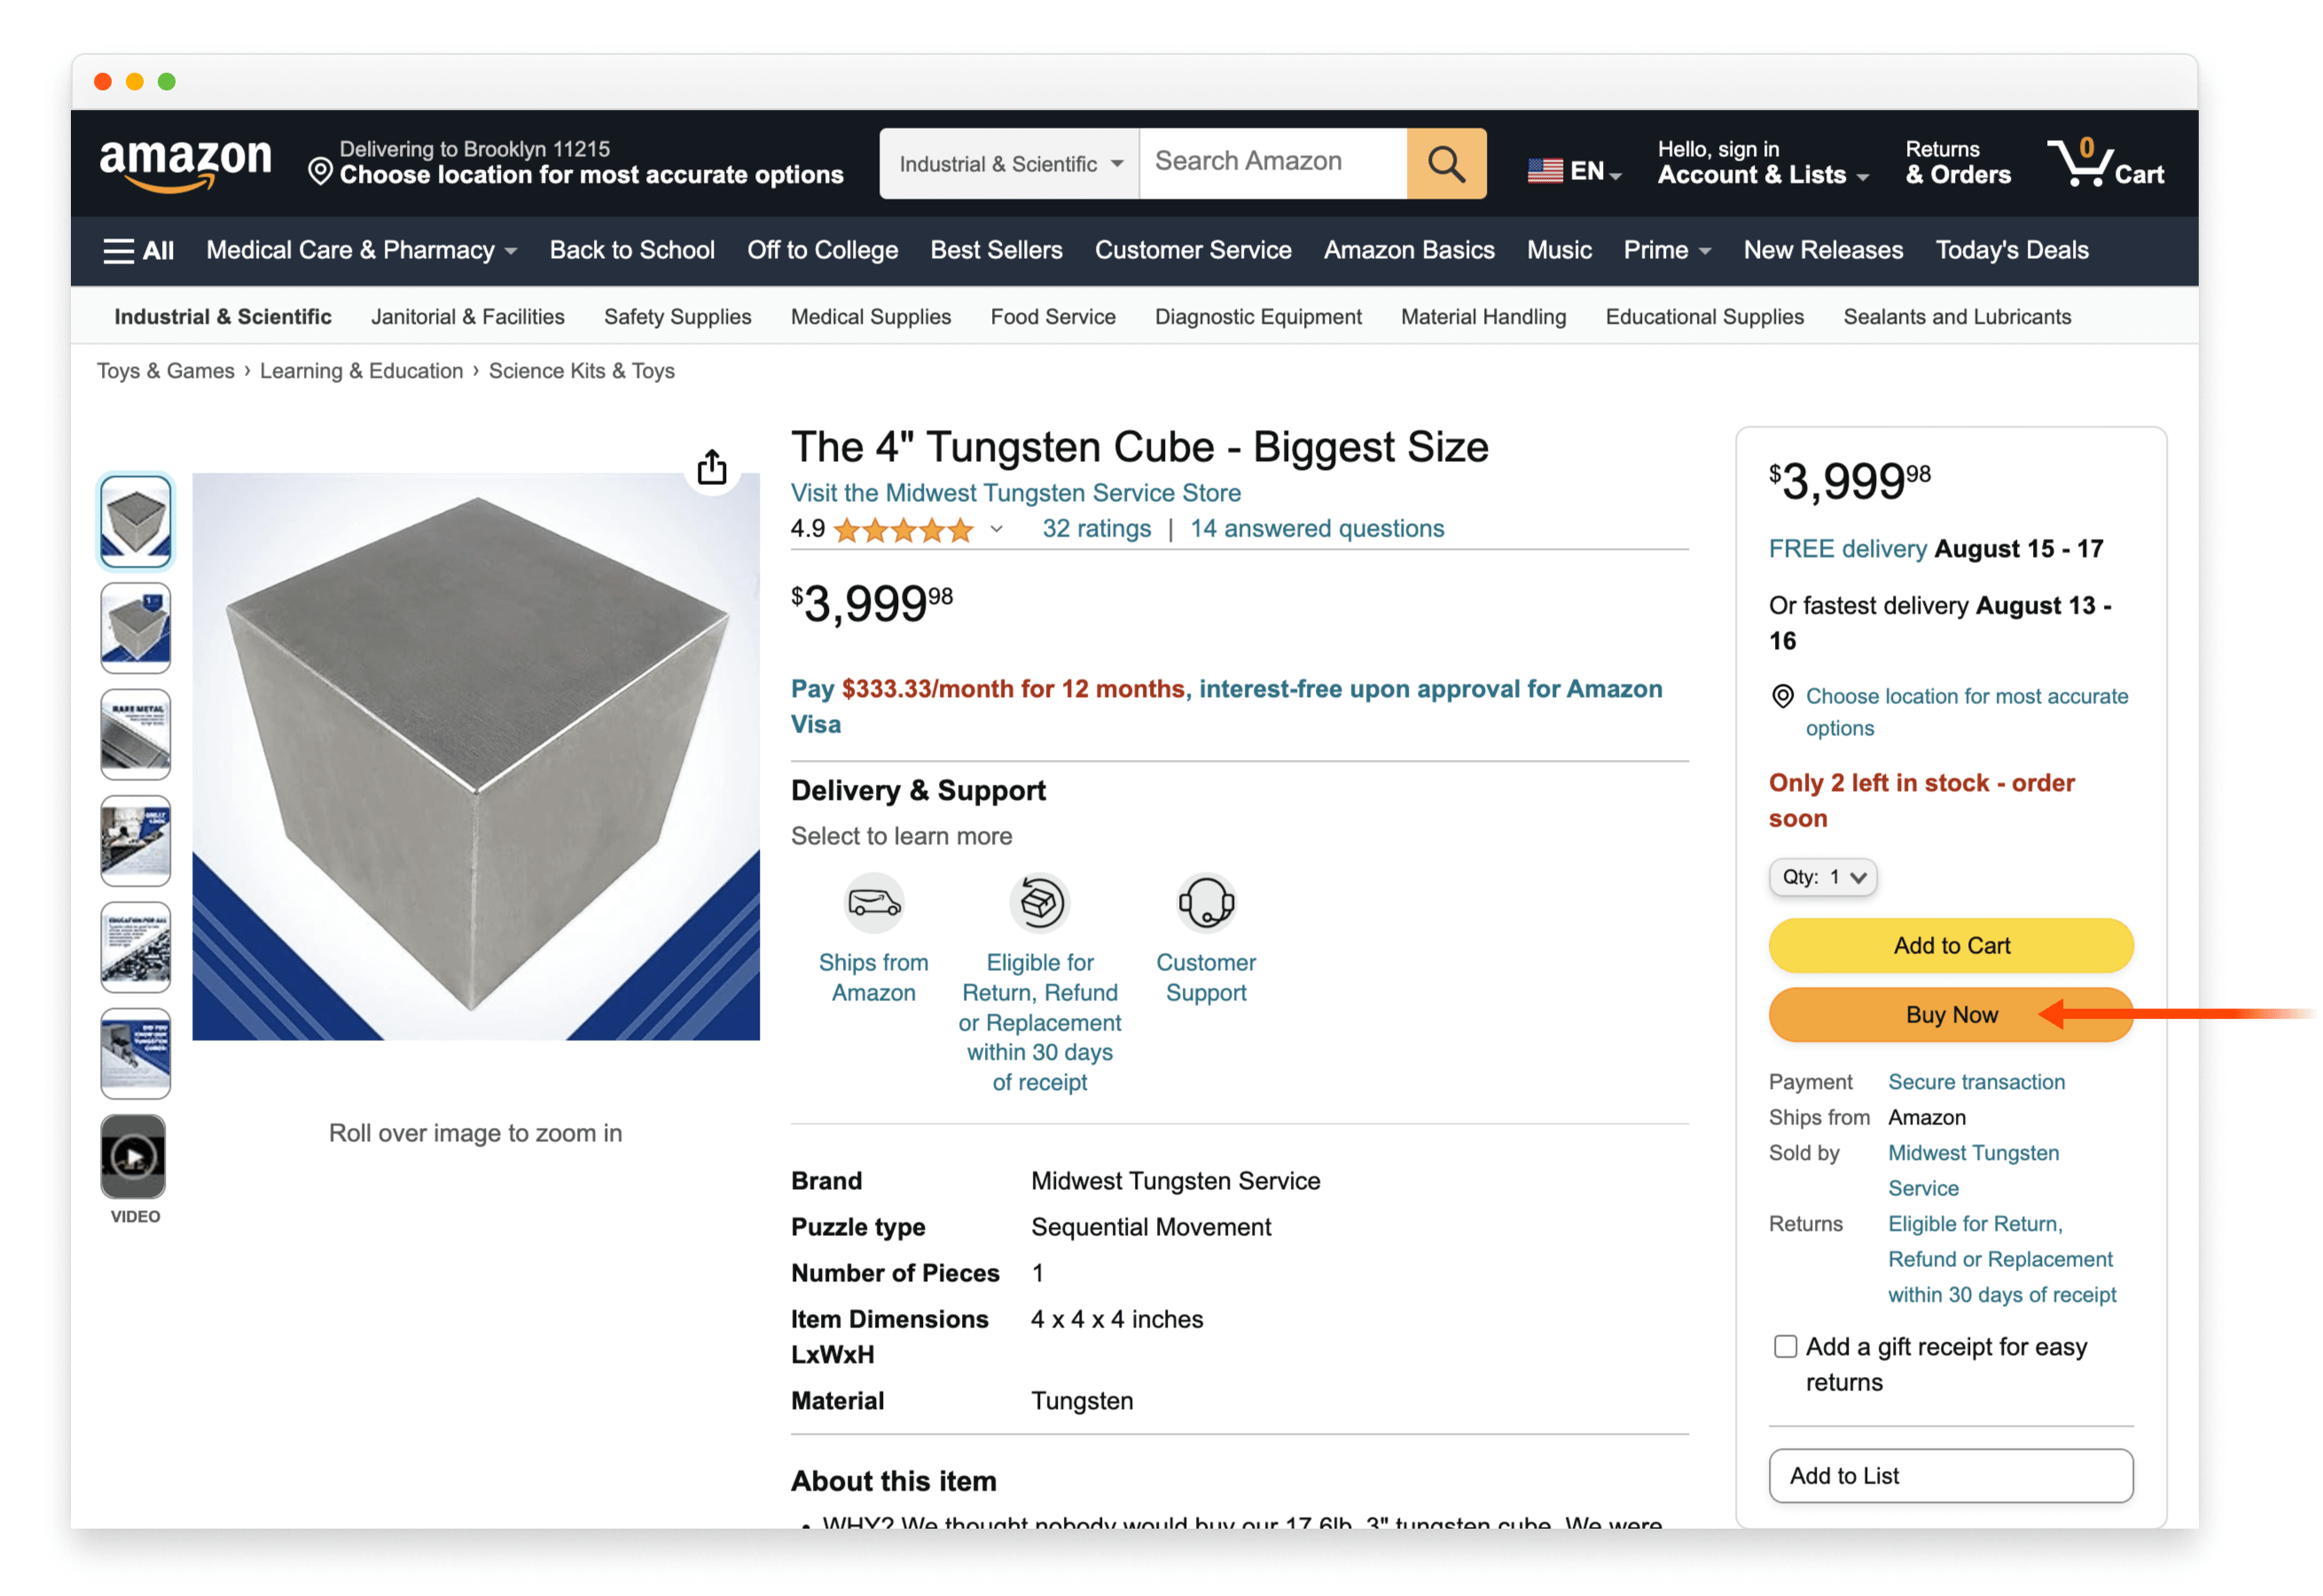 Screenshot of an Amazon.com product detail page for a 4" Tungsten Cube